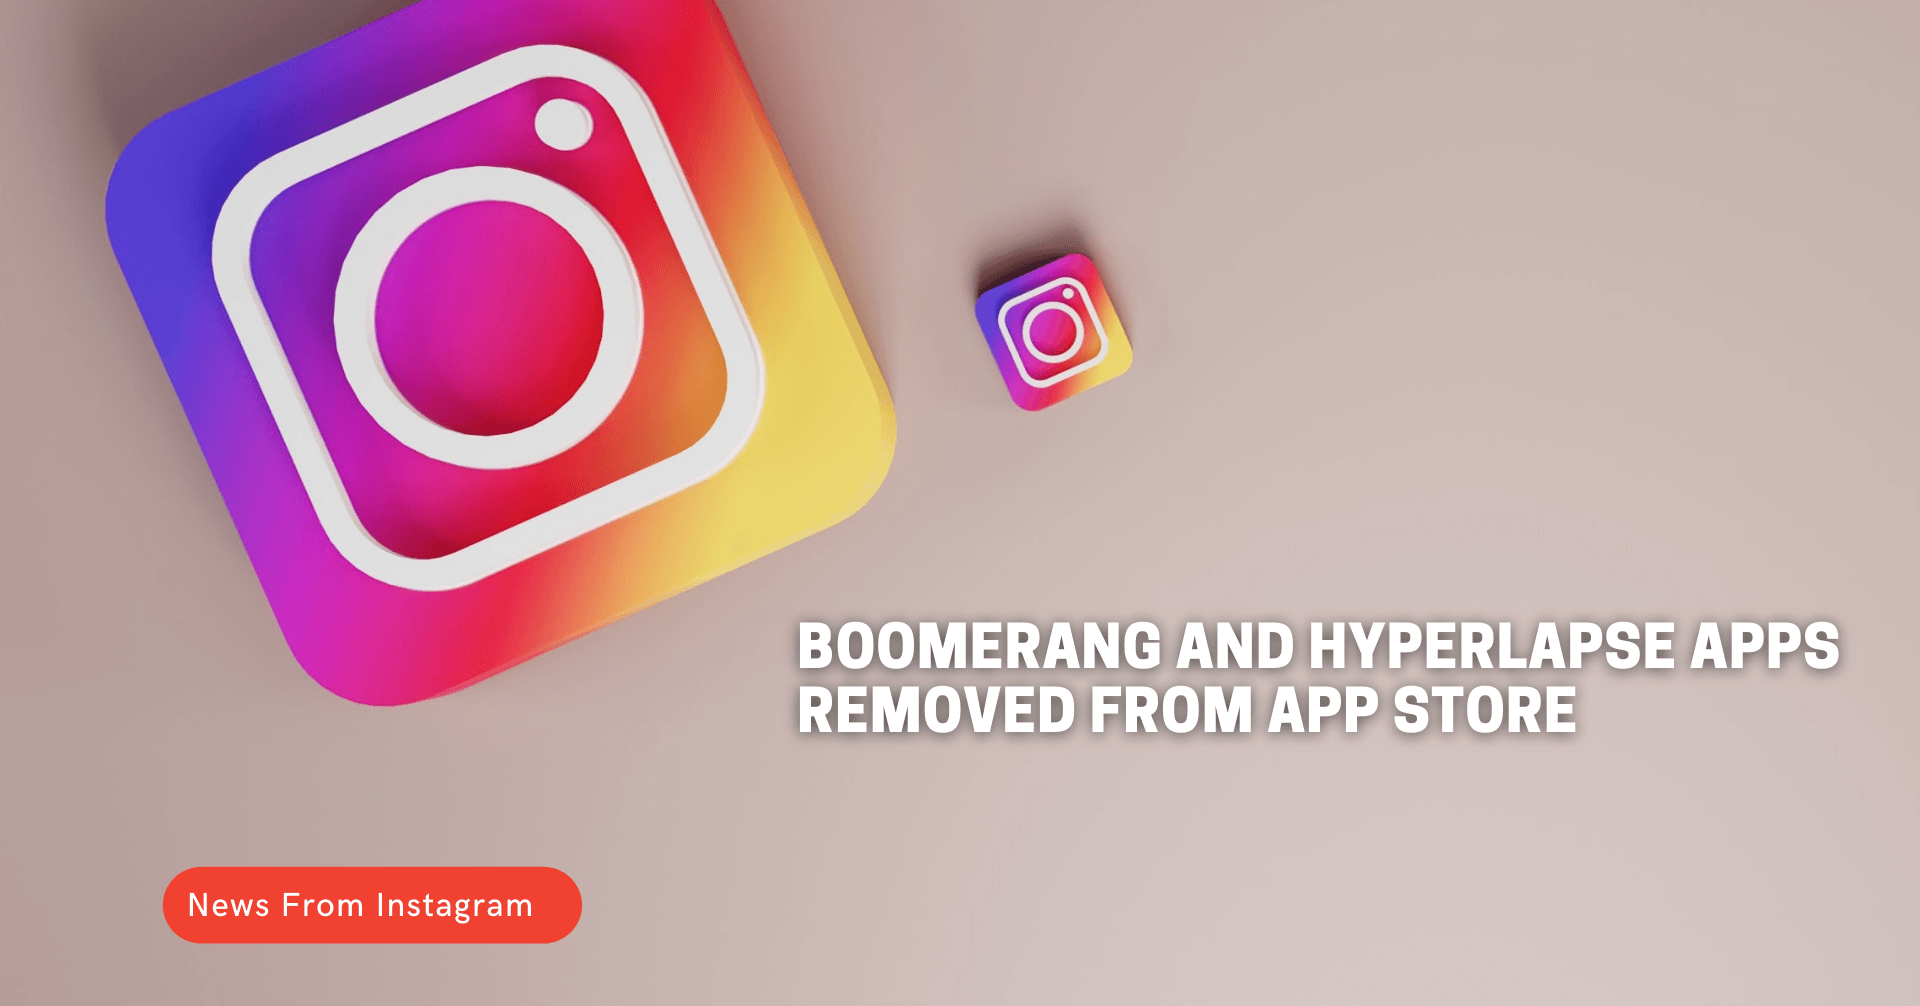 Instagram Pulls Down Boomerang and Hyperlapse Apps from the app store